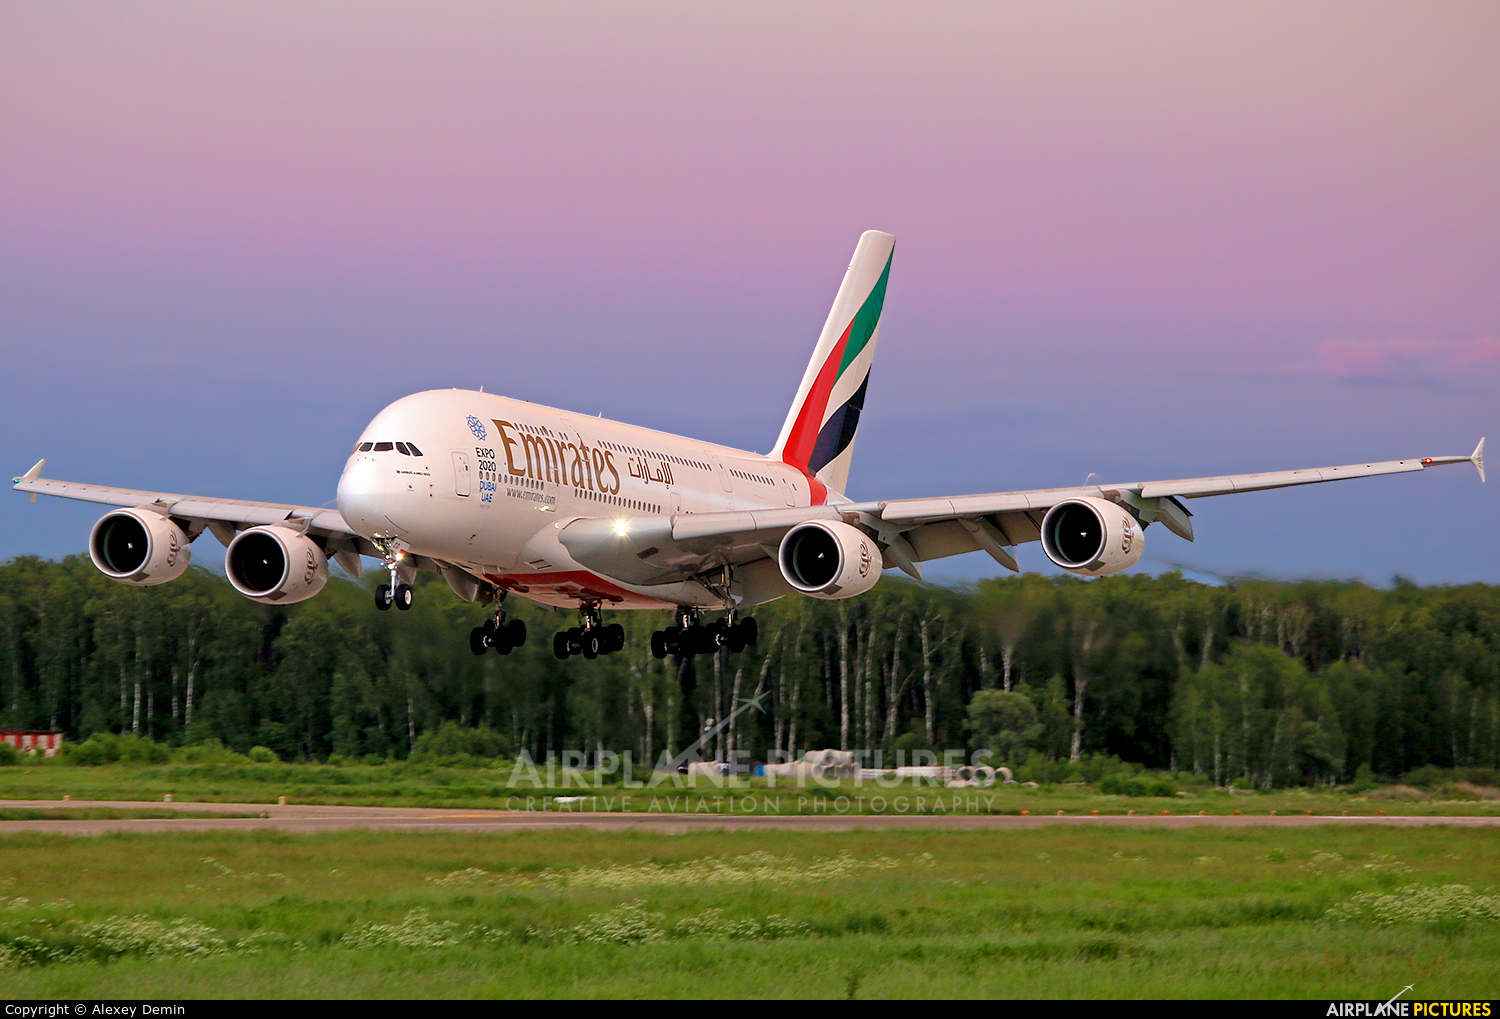 A6-EOO - Emirates Airlines Airbus A380 at Moscow - Domodedovo | Photo ID  964993 